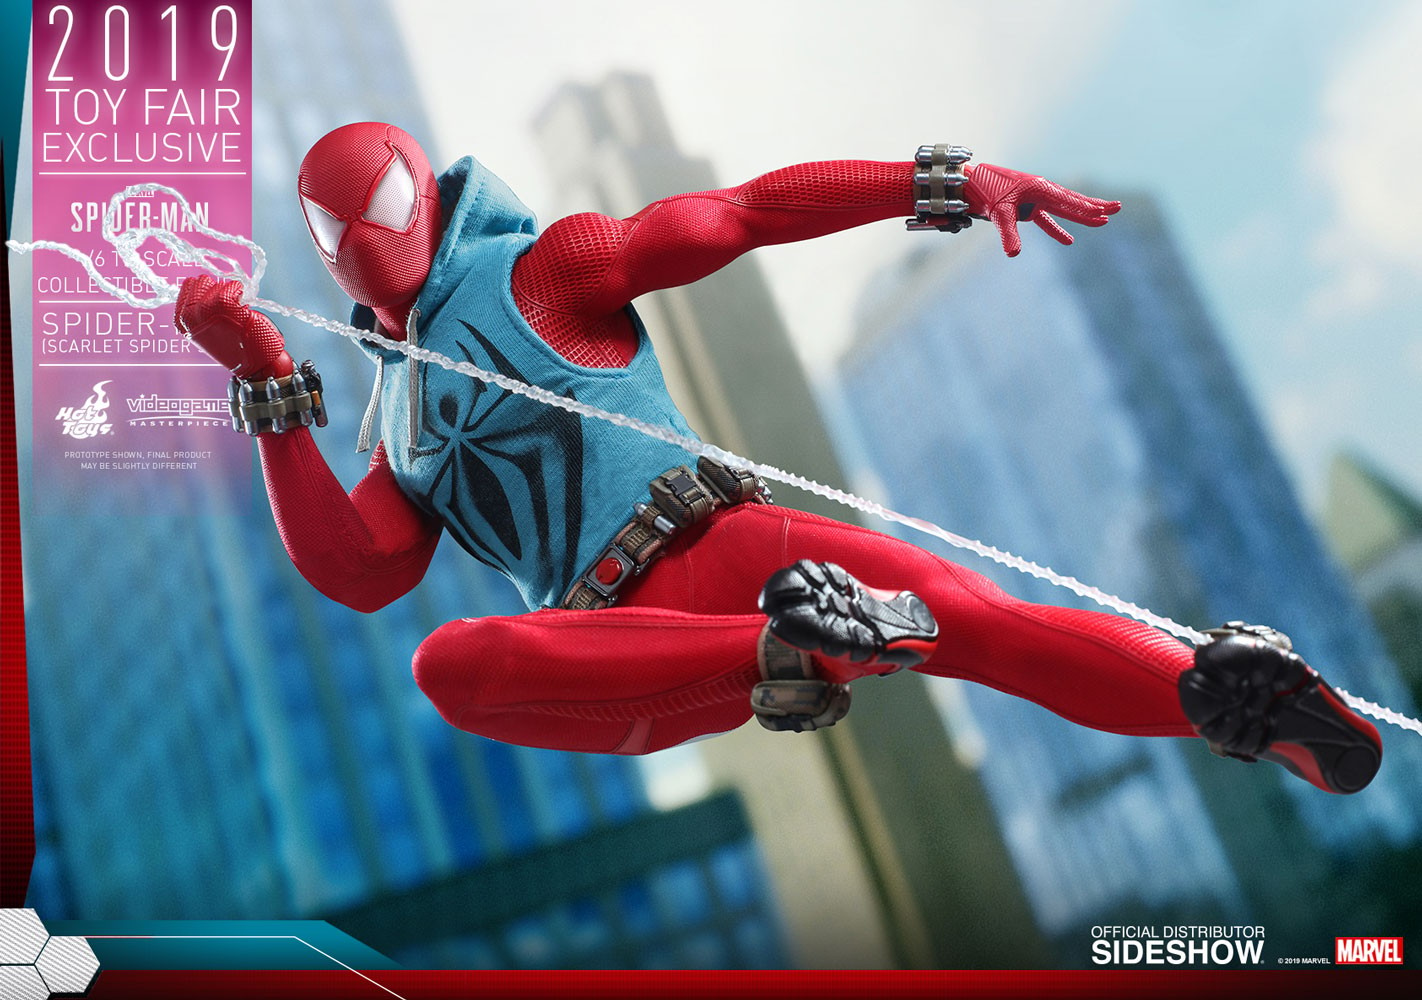 Spider-Man (Scarlet Spider Suit) Exclusive Edition (Prototype Shown) View 12